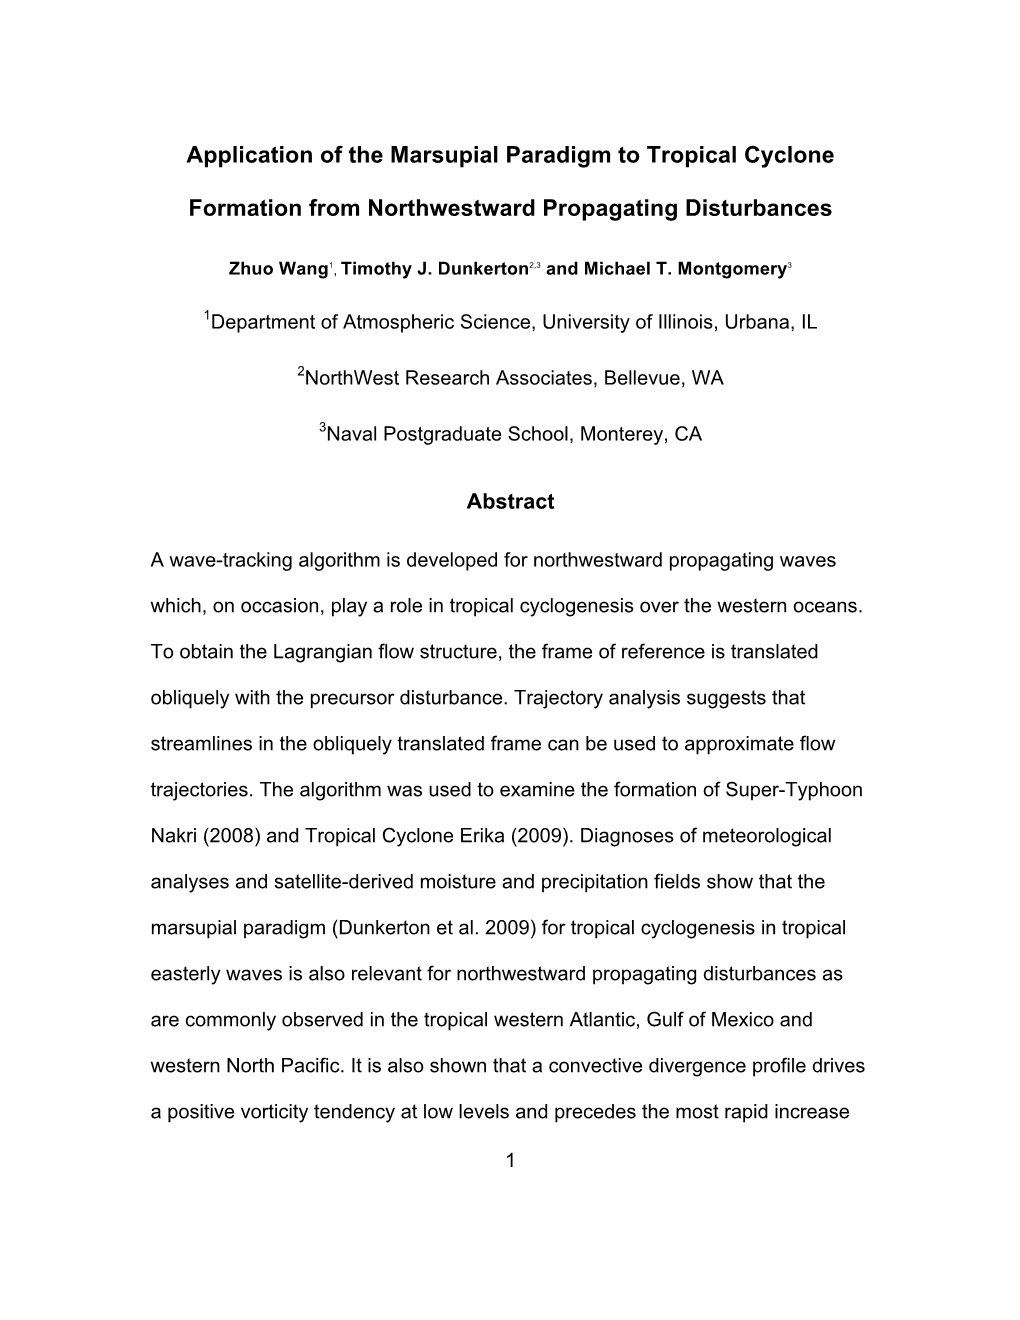 Application of the Marsupial Paradigm to Tropical Cyclone Formation From